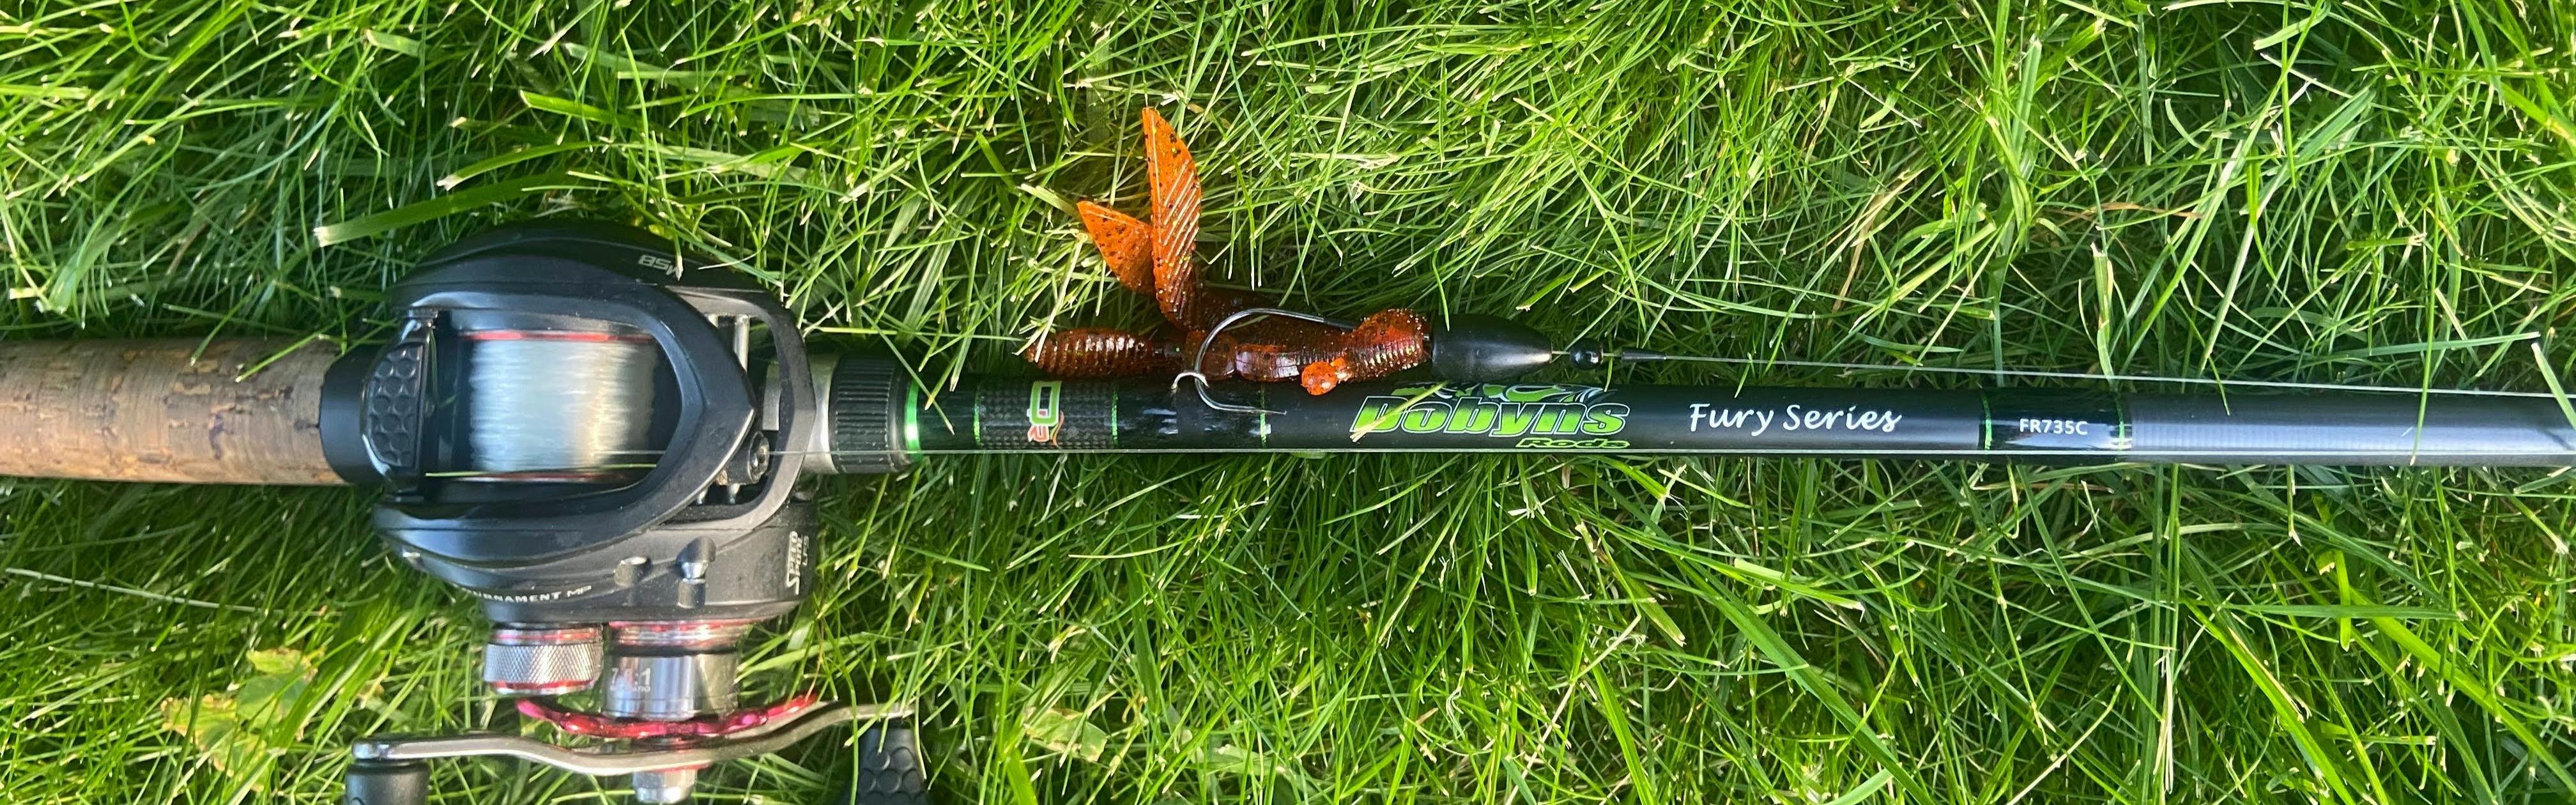 Expert Review: Temple Fork Outfitters Trout-Panfish Rod